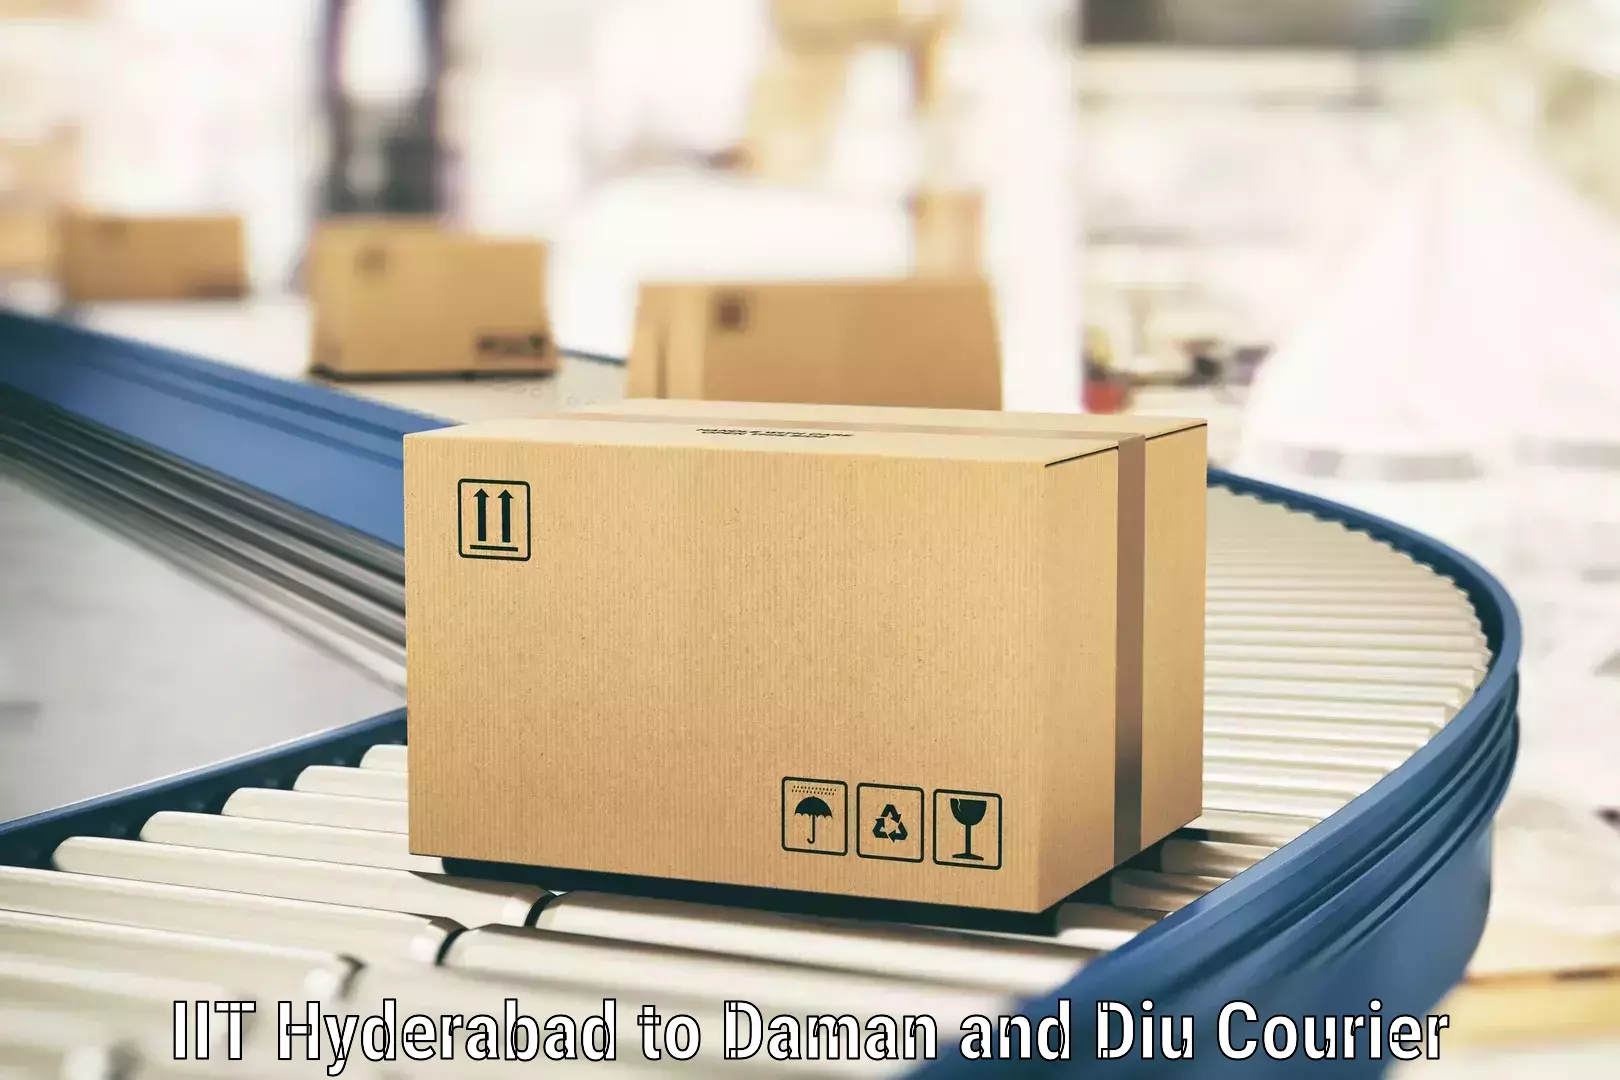 State-of-the-art courier technology IIT Hyderabad to Diu